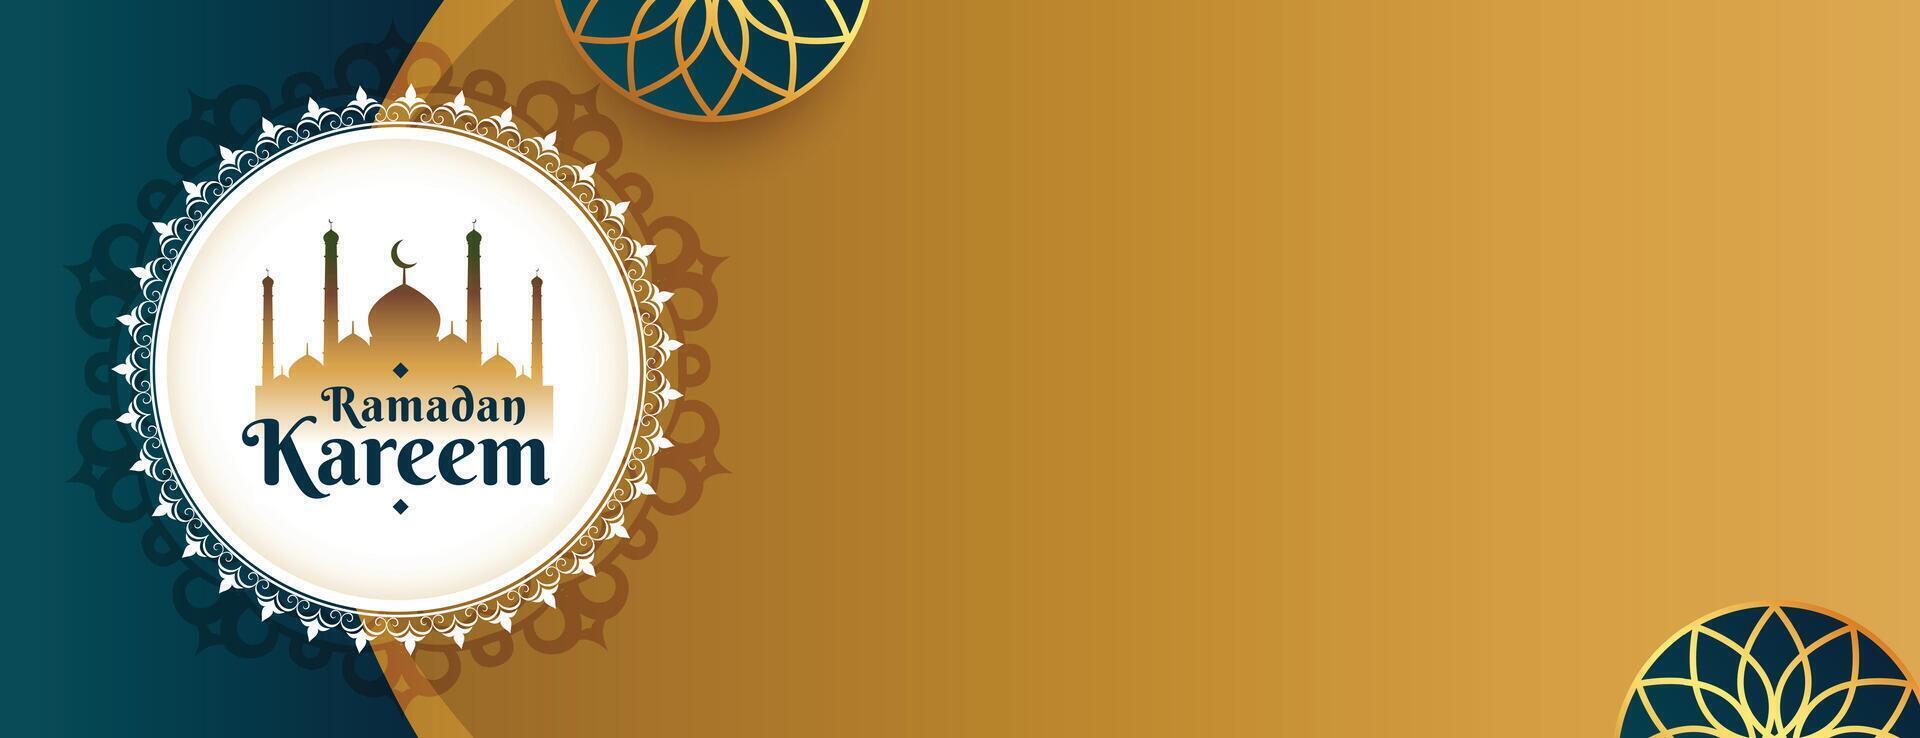 ramadan kareem eid wishes greeting with text space vector